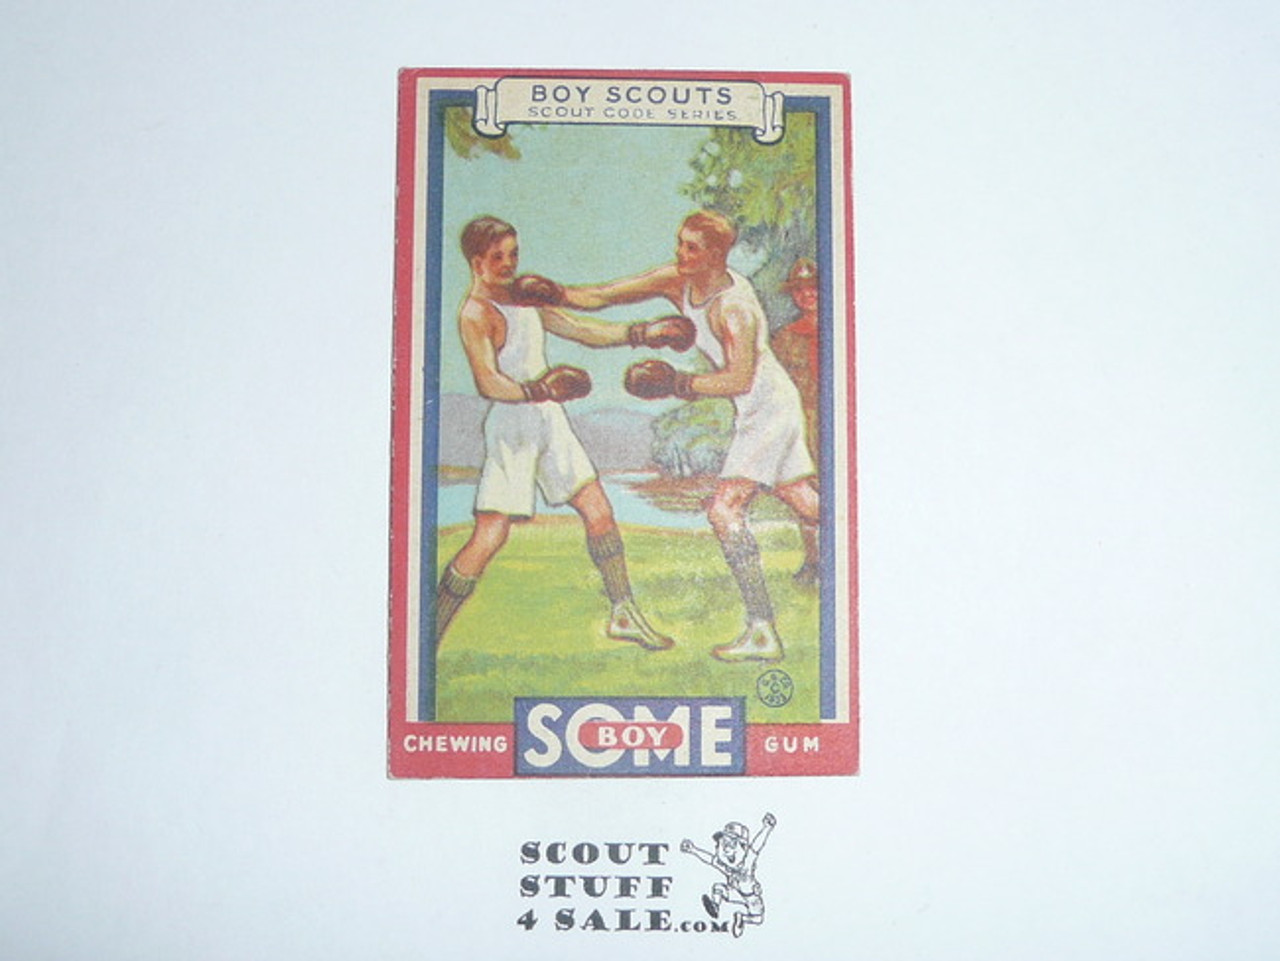 1933 Some Boy Chewing Gum Boy Scout Card Set By the Goudey Gum Company, Boston Ma, #4 A Scout is Clean